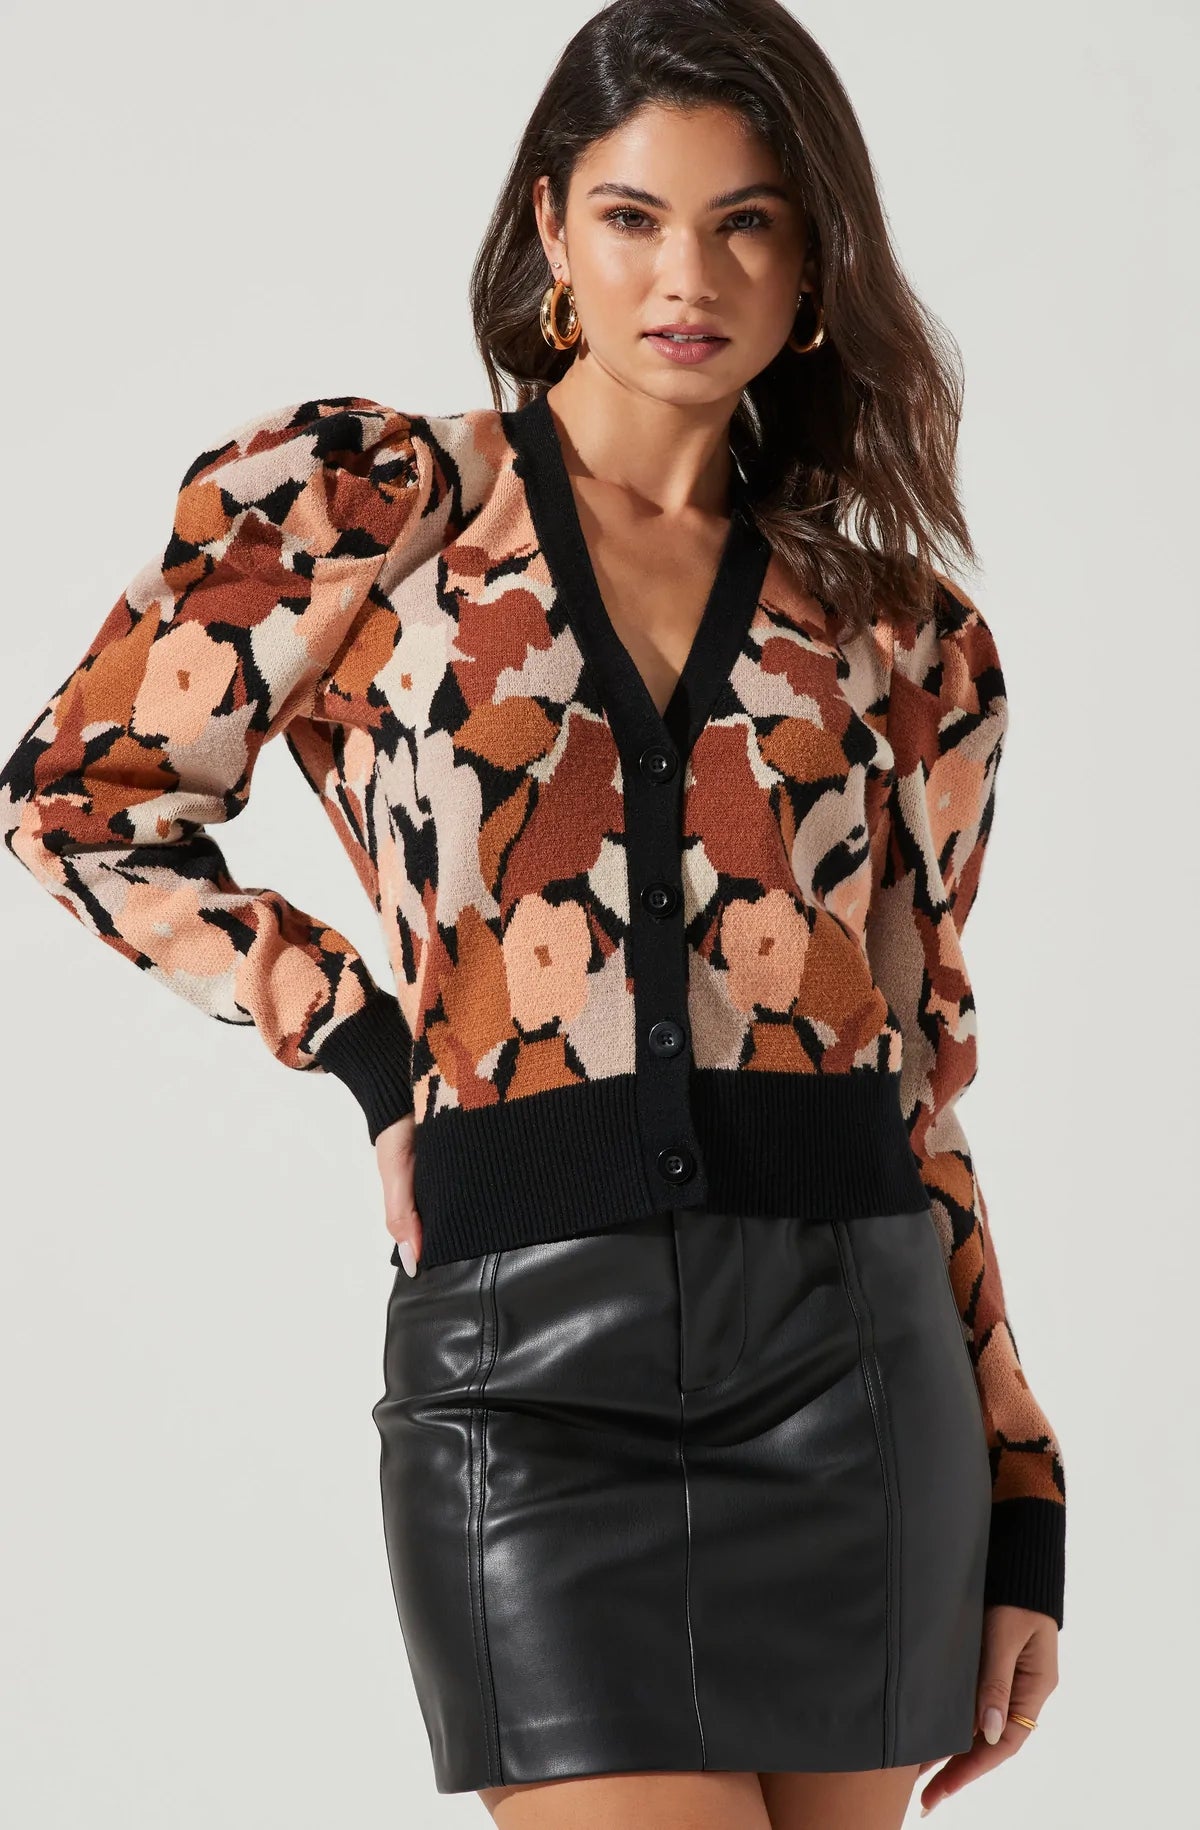 Copper Multi Floral Romilly Cardigan